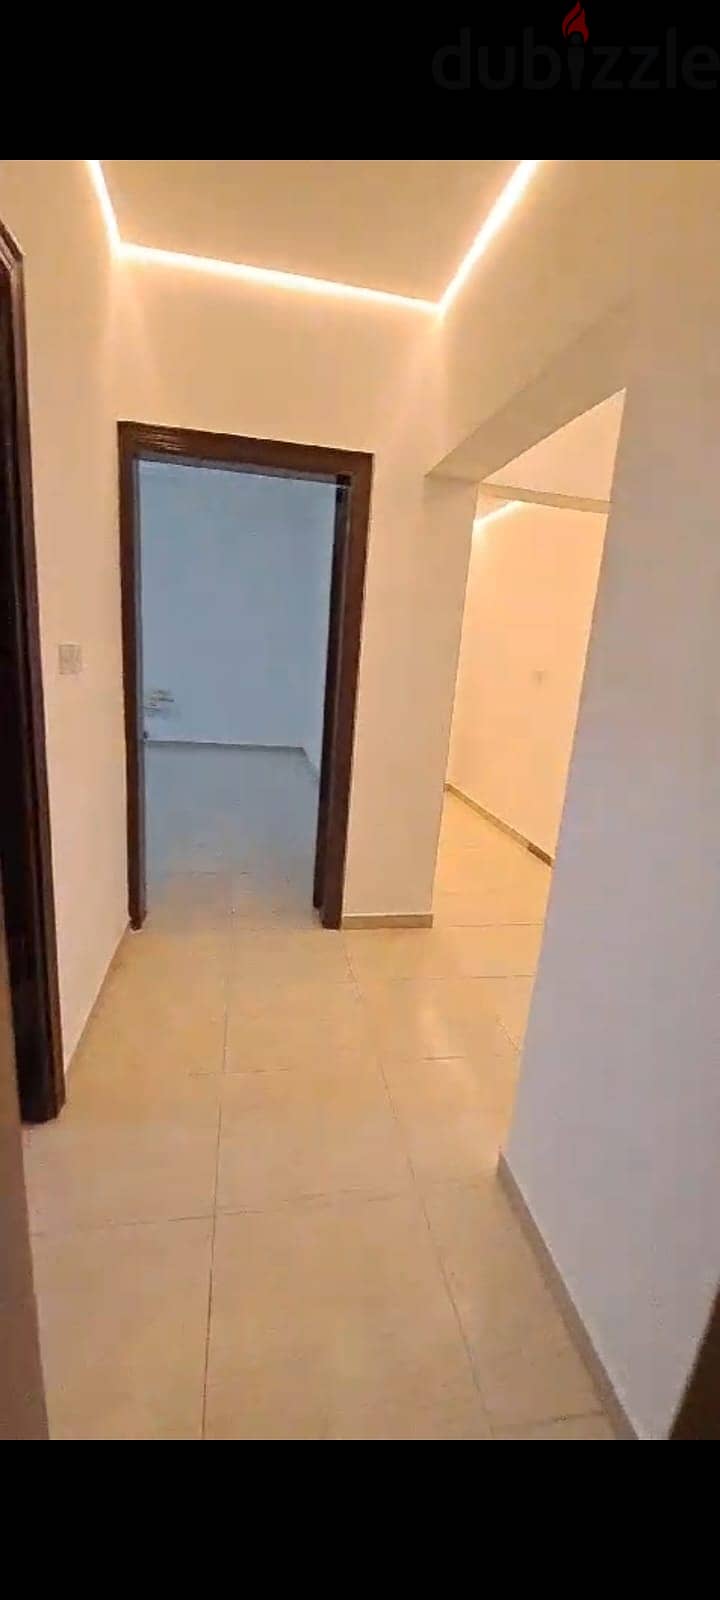 For rent flat (Ground floor apartment) in compound in Al Nasr 3bhk 12